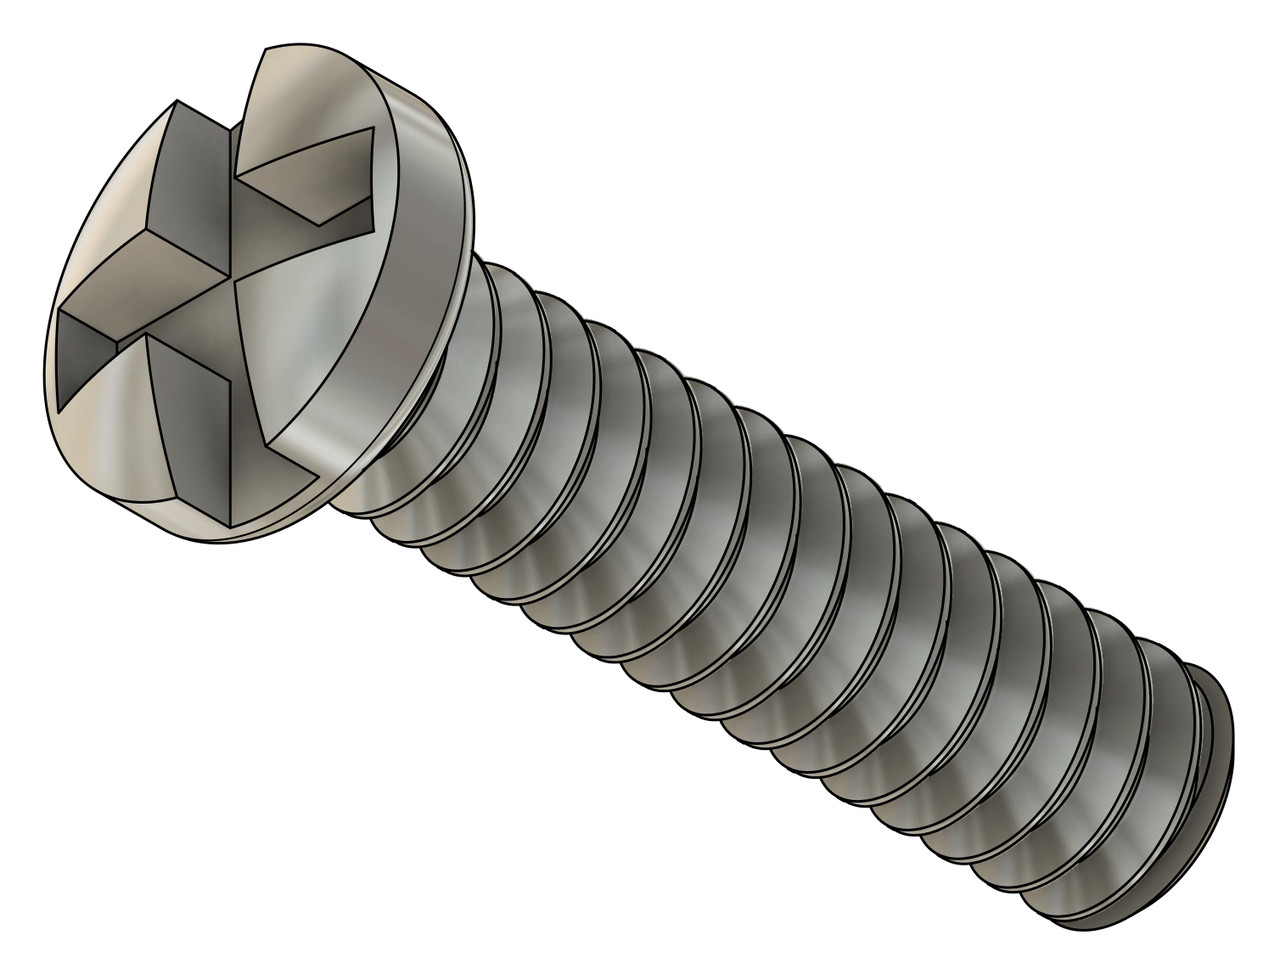 Machine Screw Pan Head
Slotted Cross-Recess (Phillips)
Thread 00-90 2A
Length Under Head 3/16" (4.7mm)
Overall Length 5.3mm
Head Diameter 0.078" (2.00mm)
Stainless Steel
100 Count Package